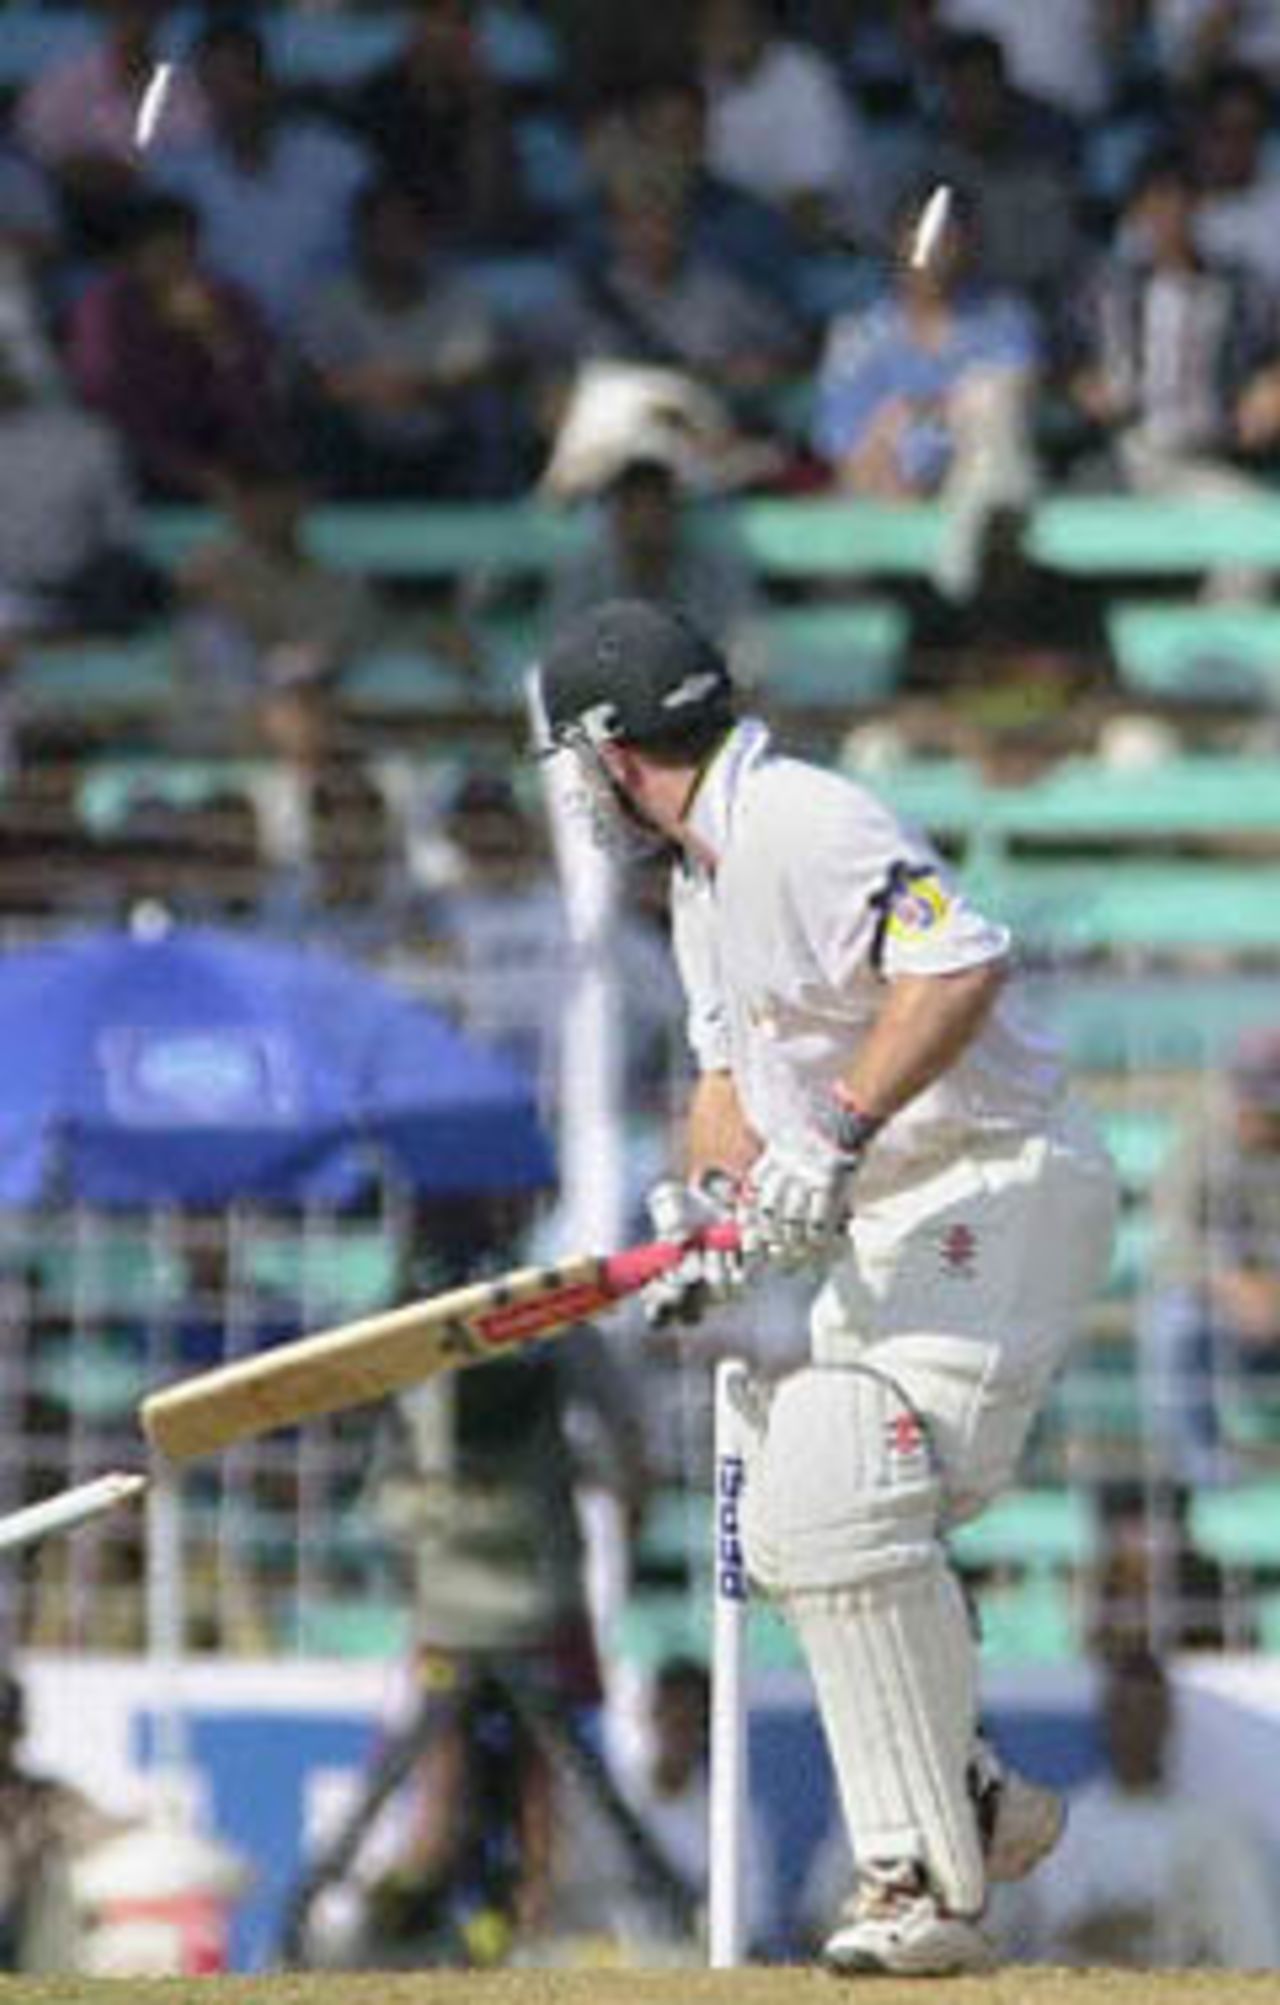 Australian batsman Michael Slater watches his wickets be uprooted off the bowling of Indian seamer Ajit Agarkar on the opening day of the first Test match between India and Australia at Wankhade stadium in Bombay, 27 February 2001. Australia were 49 for 1 in reply to India's first innings score of 176.